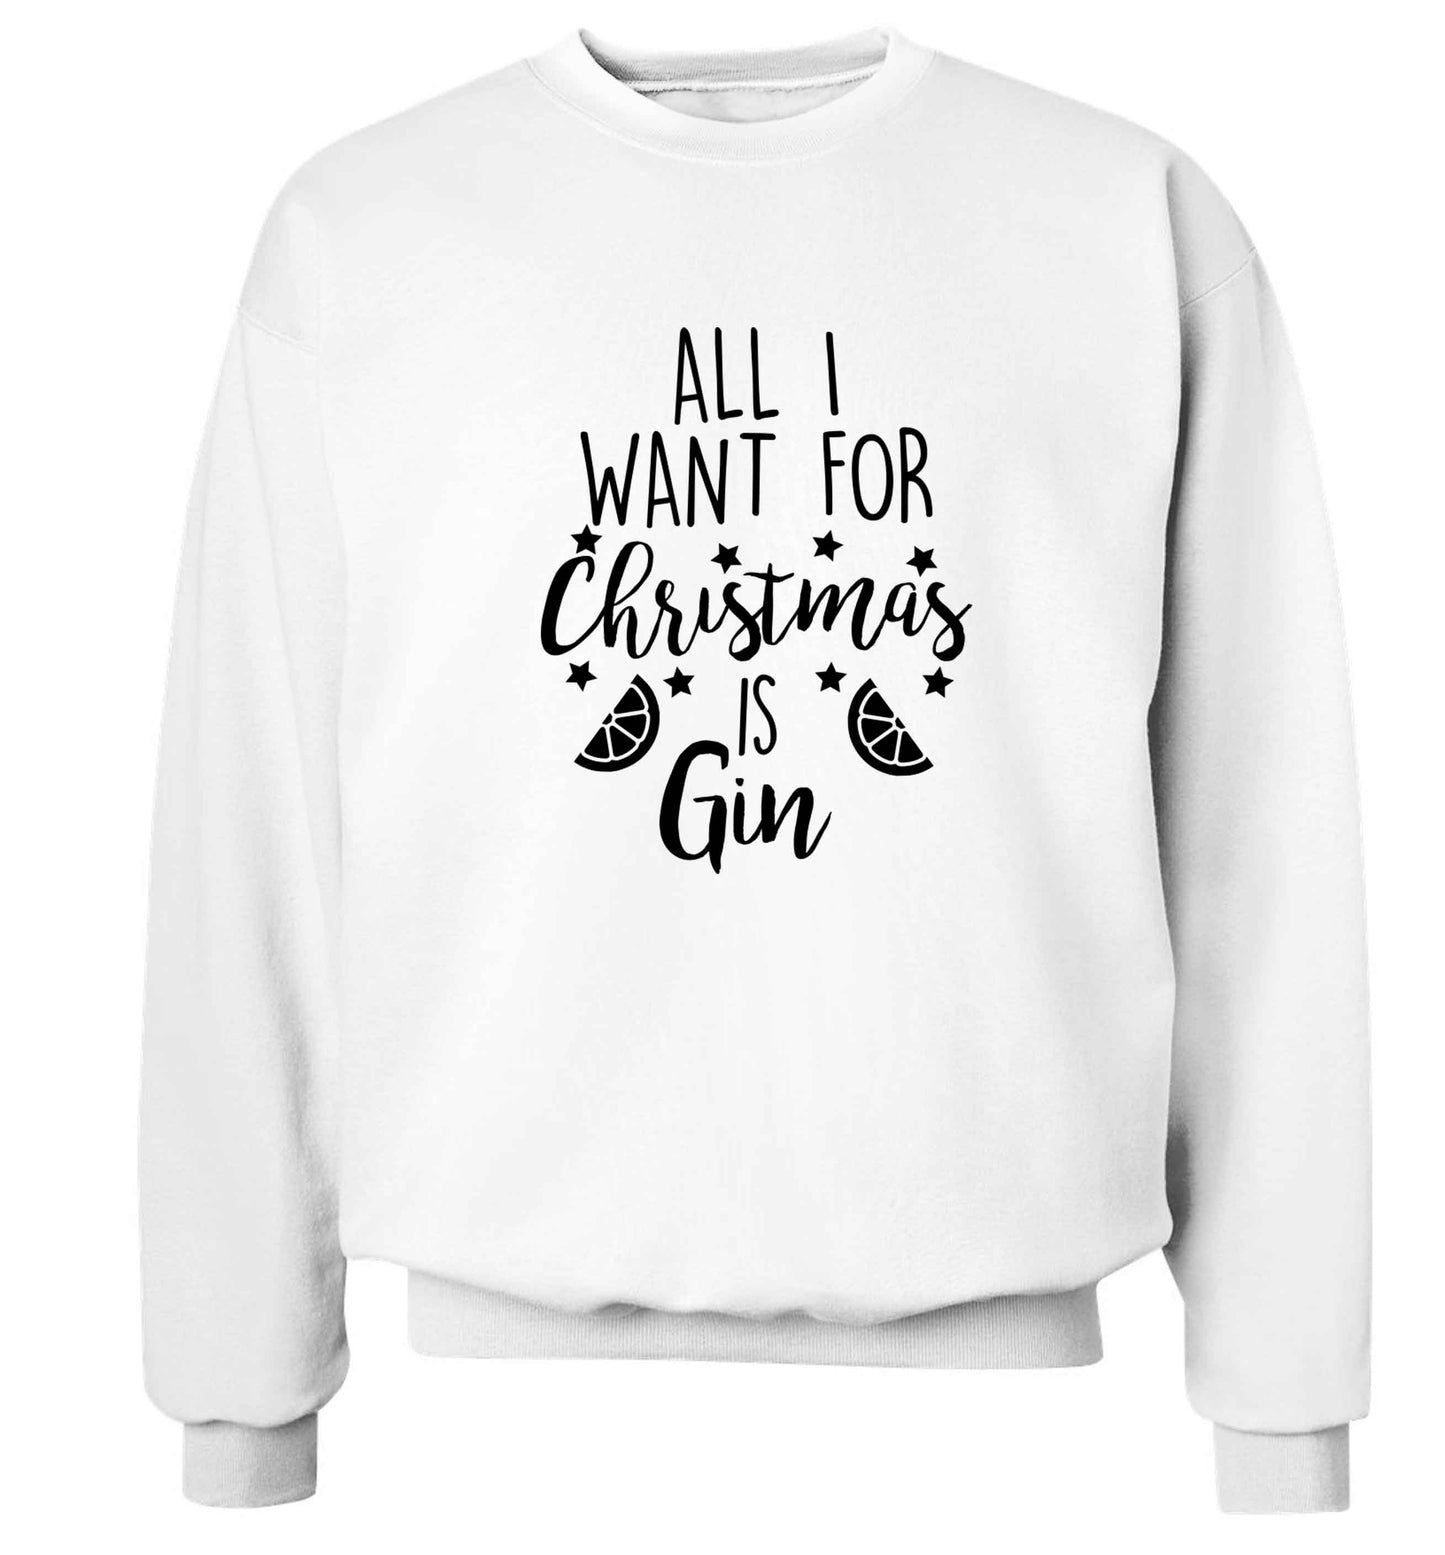 All I want for Christmas is gin Adult's unisex white Sweater 2XL